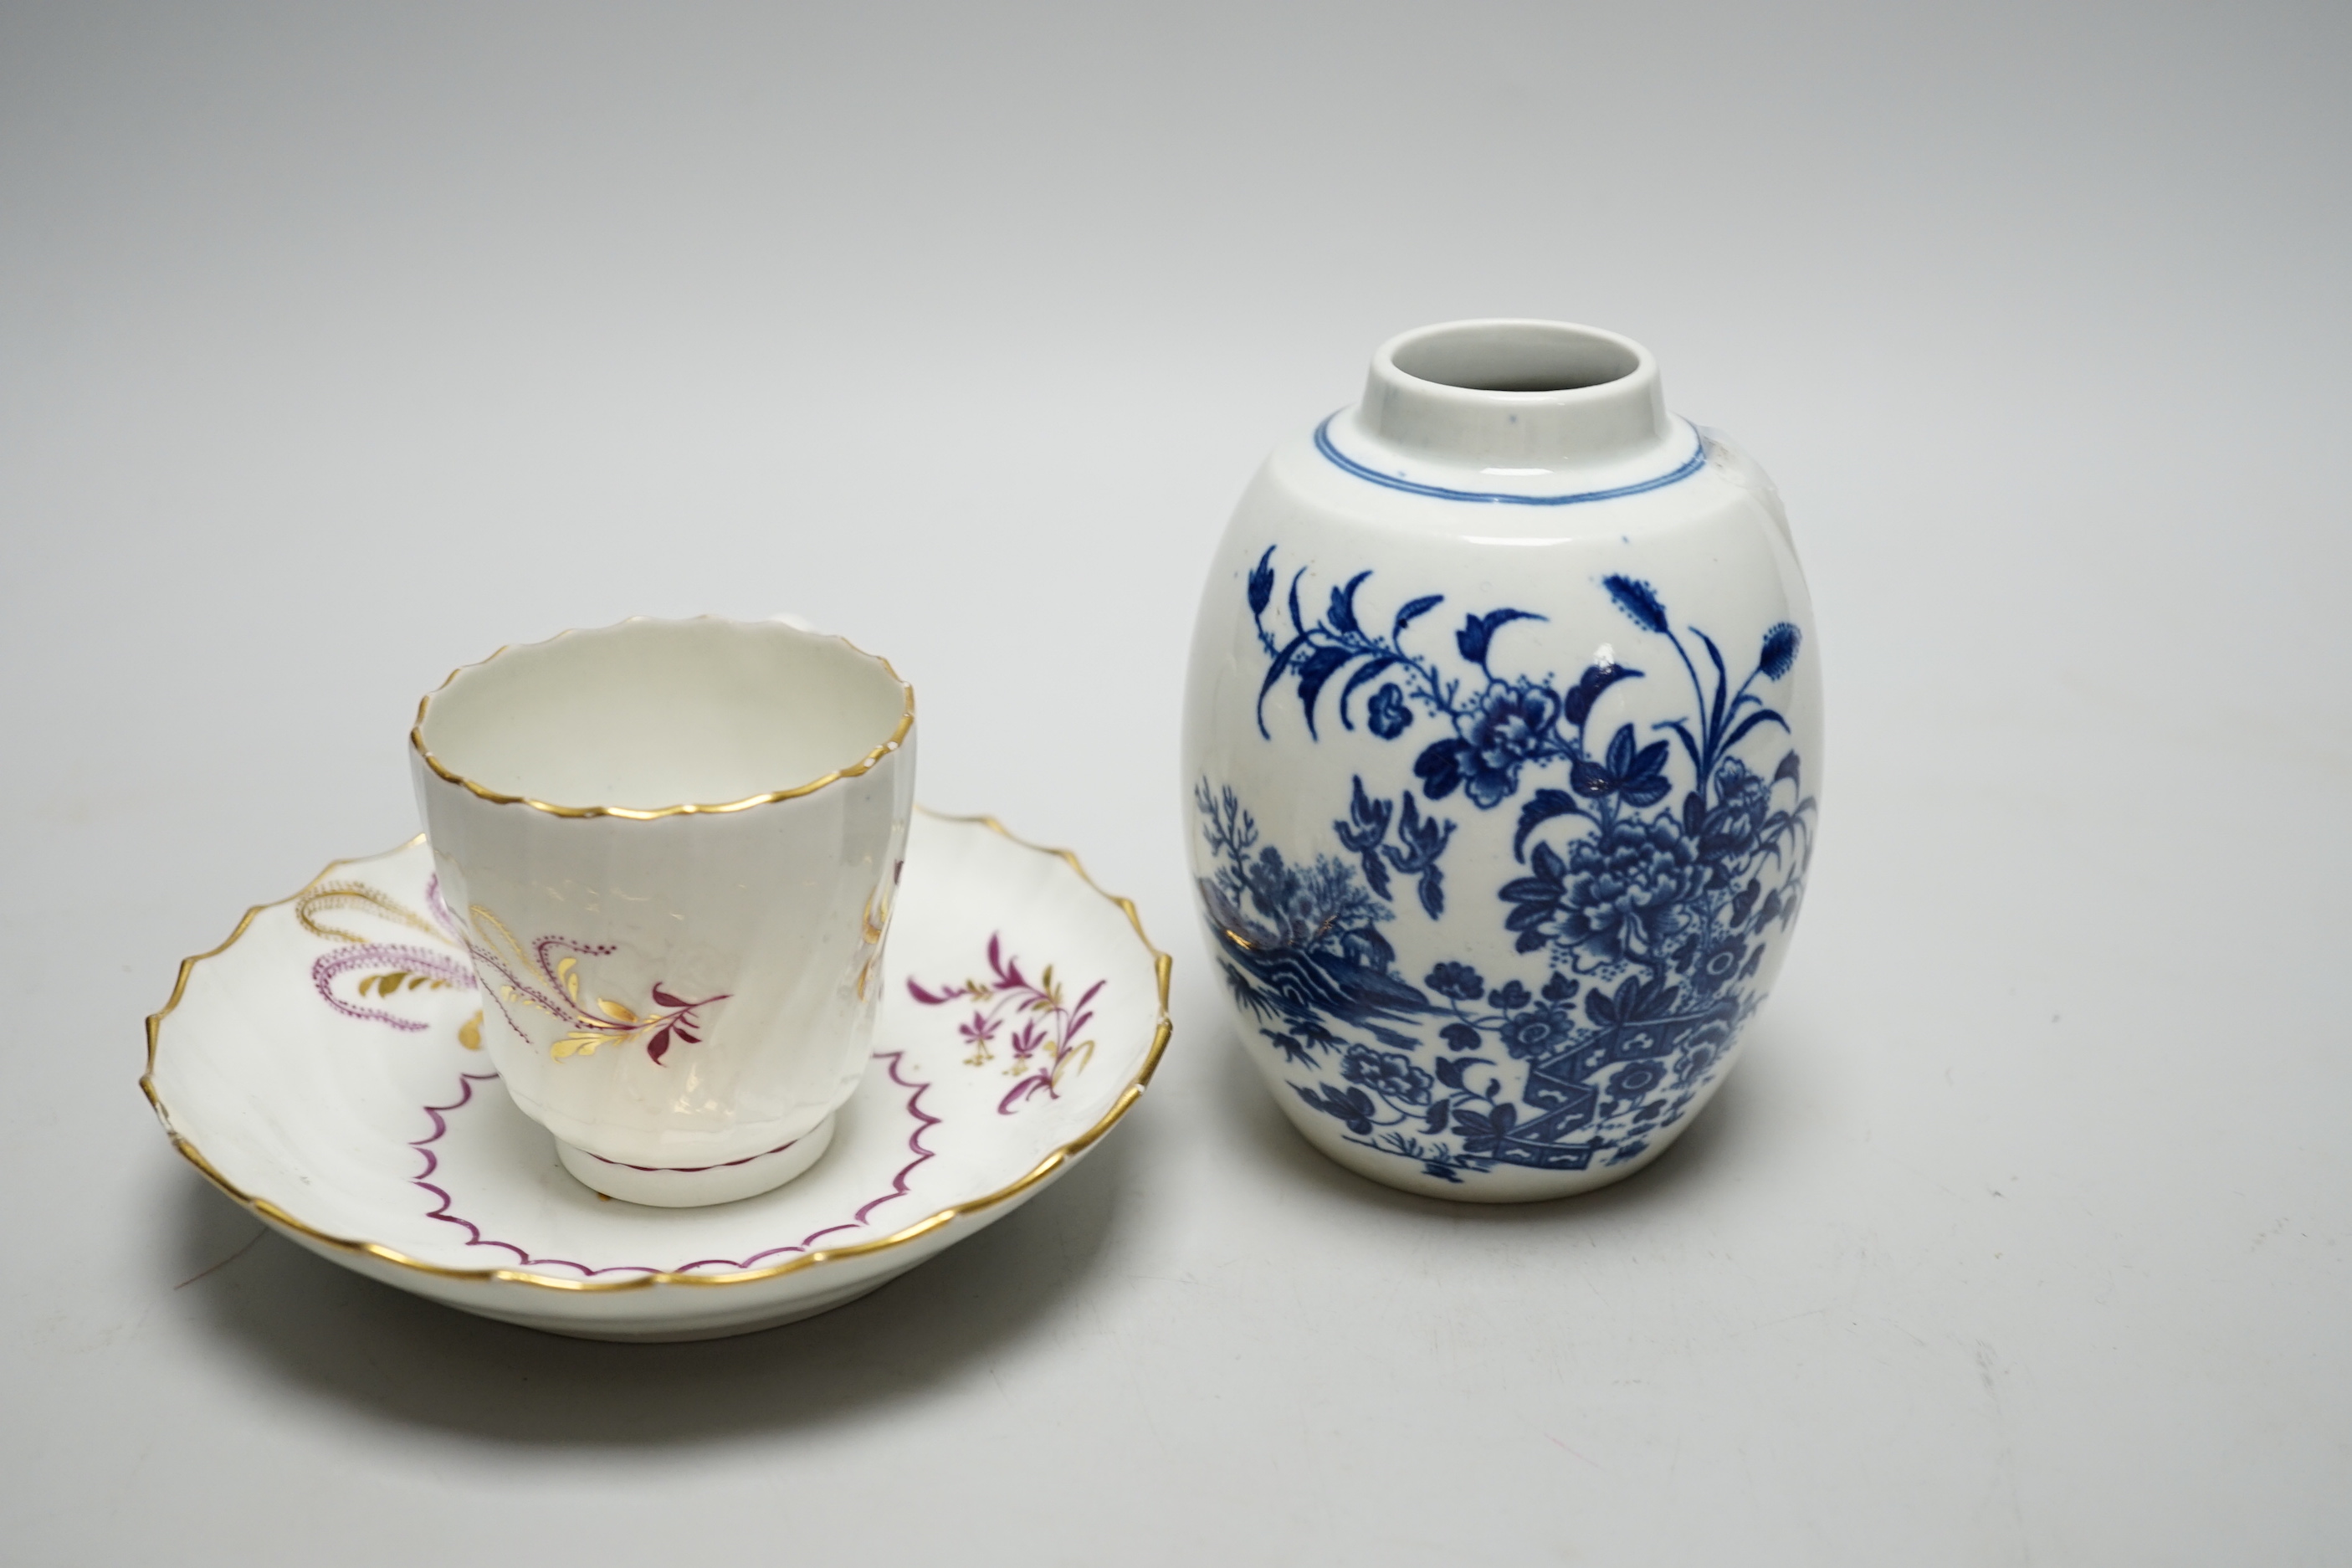 A Worcester Fence pattern tea canister, c.1775, and a Worcester wrythen coffee cup and saucer, c.1795